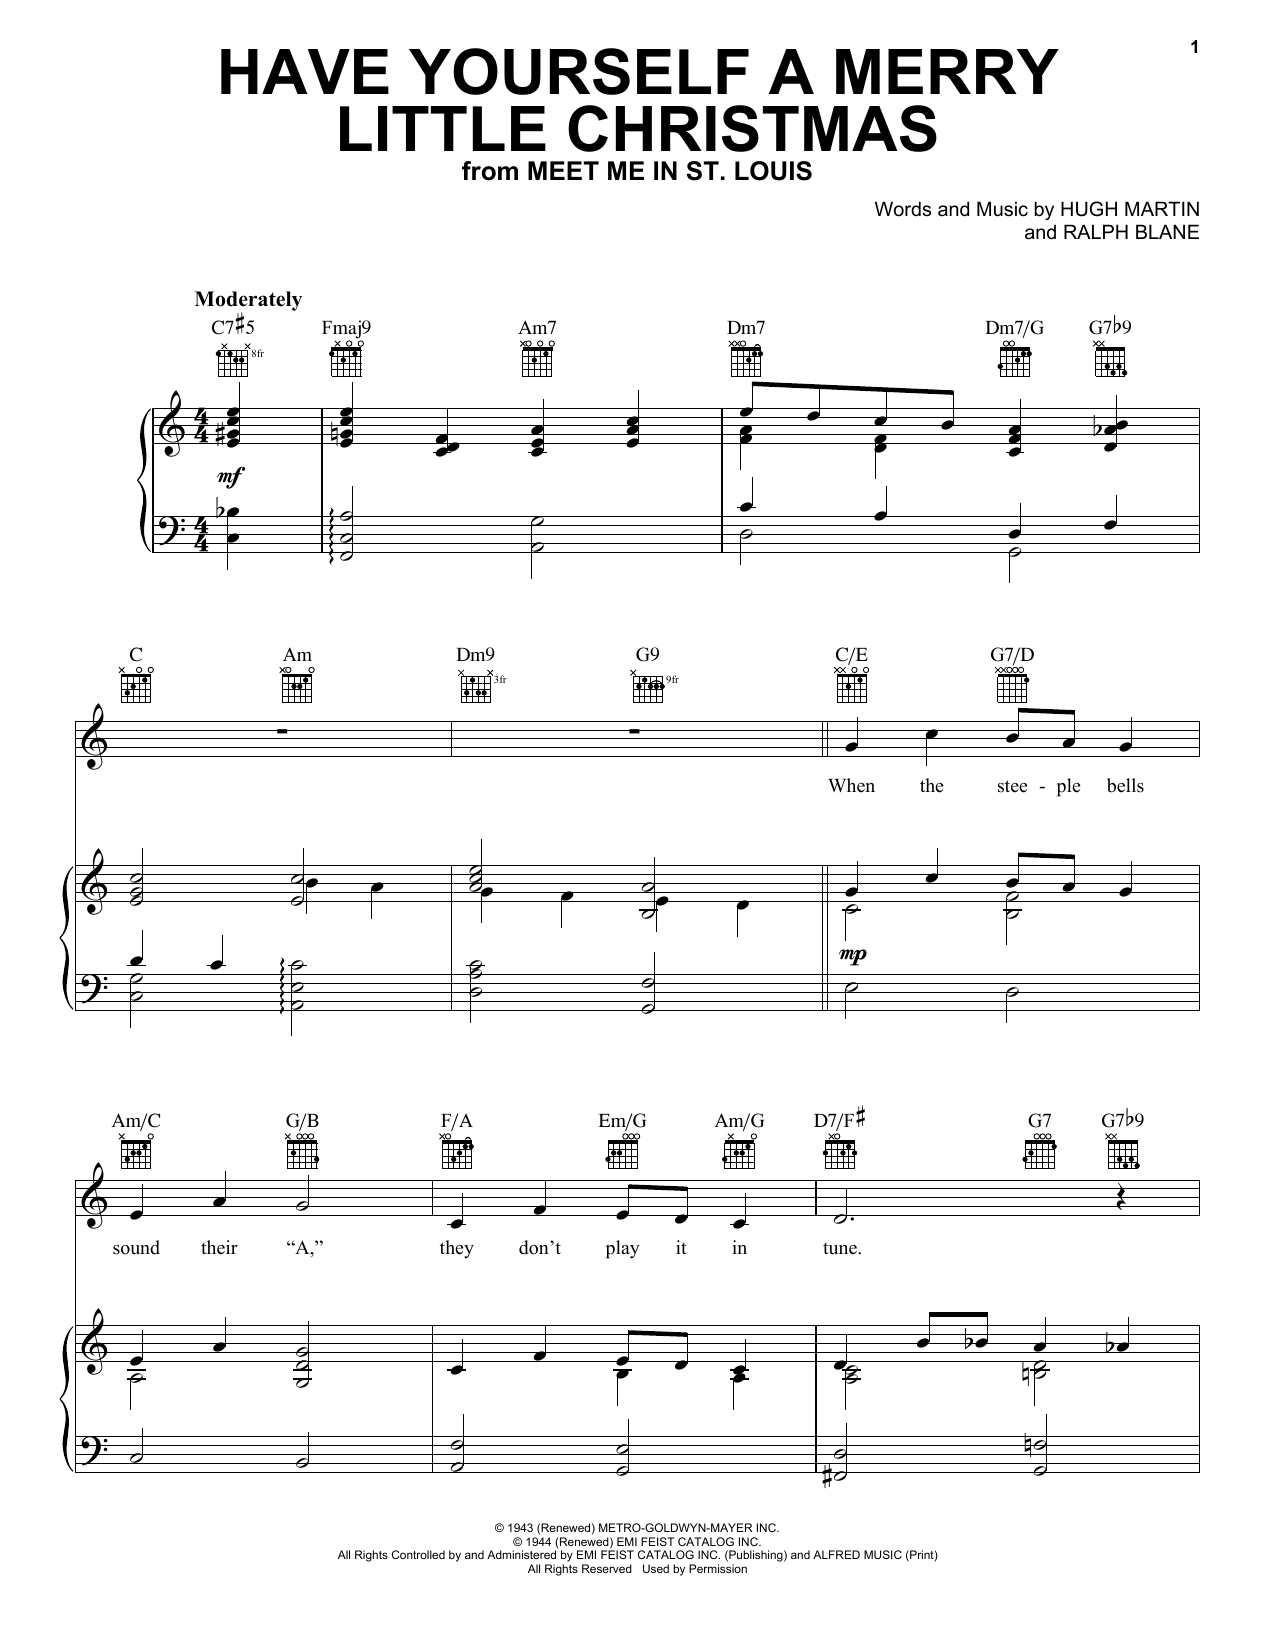 Download Frank Sinatra Have Yourself A Merry Little Christmas sheet music and printable PDF score & Easy Listening music notes